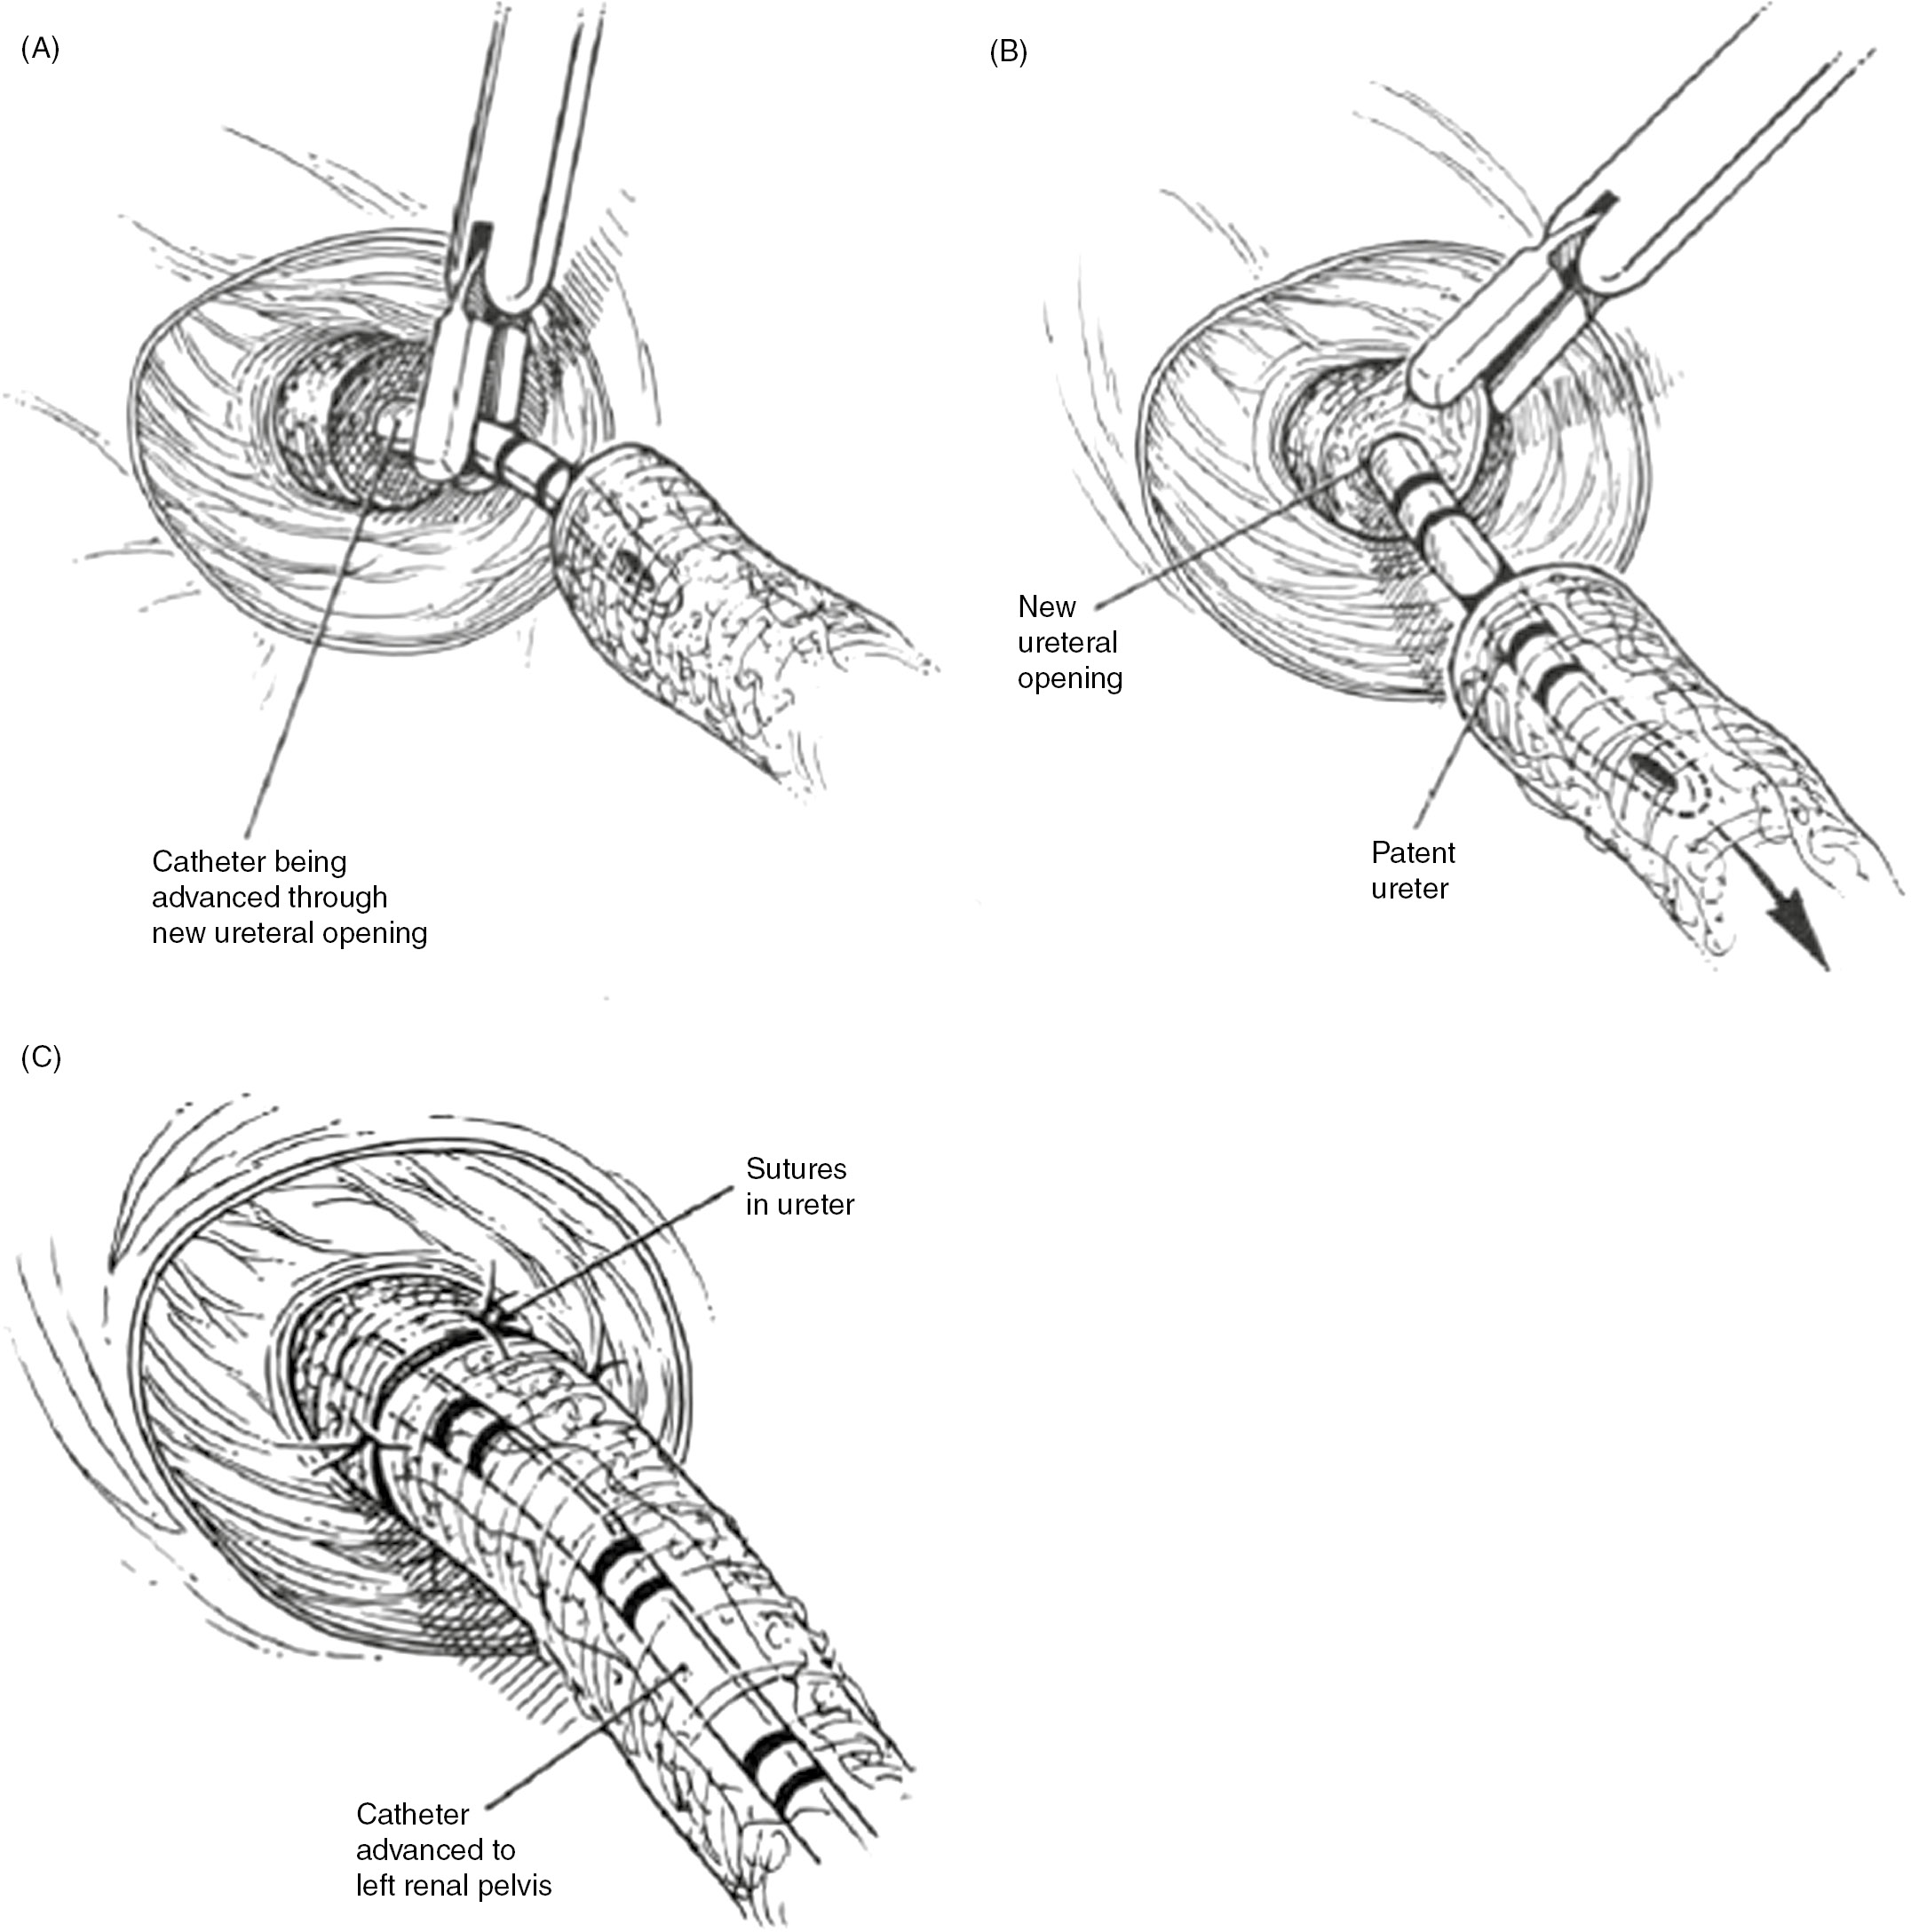 Manual of operative surgery. into the lumen of the gut by apurse-string  suture as in appendectomy.Leave uncut the suture attached to the  uppersegment of gut; apply a hemostat to the endof